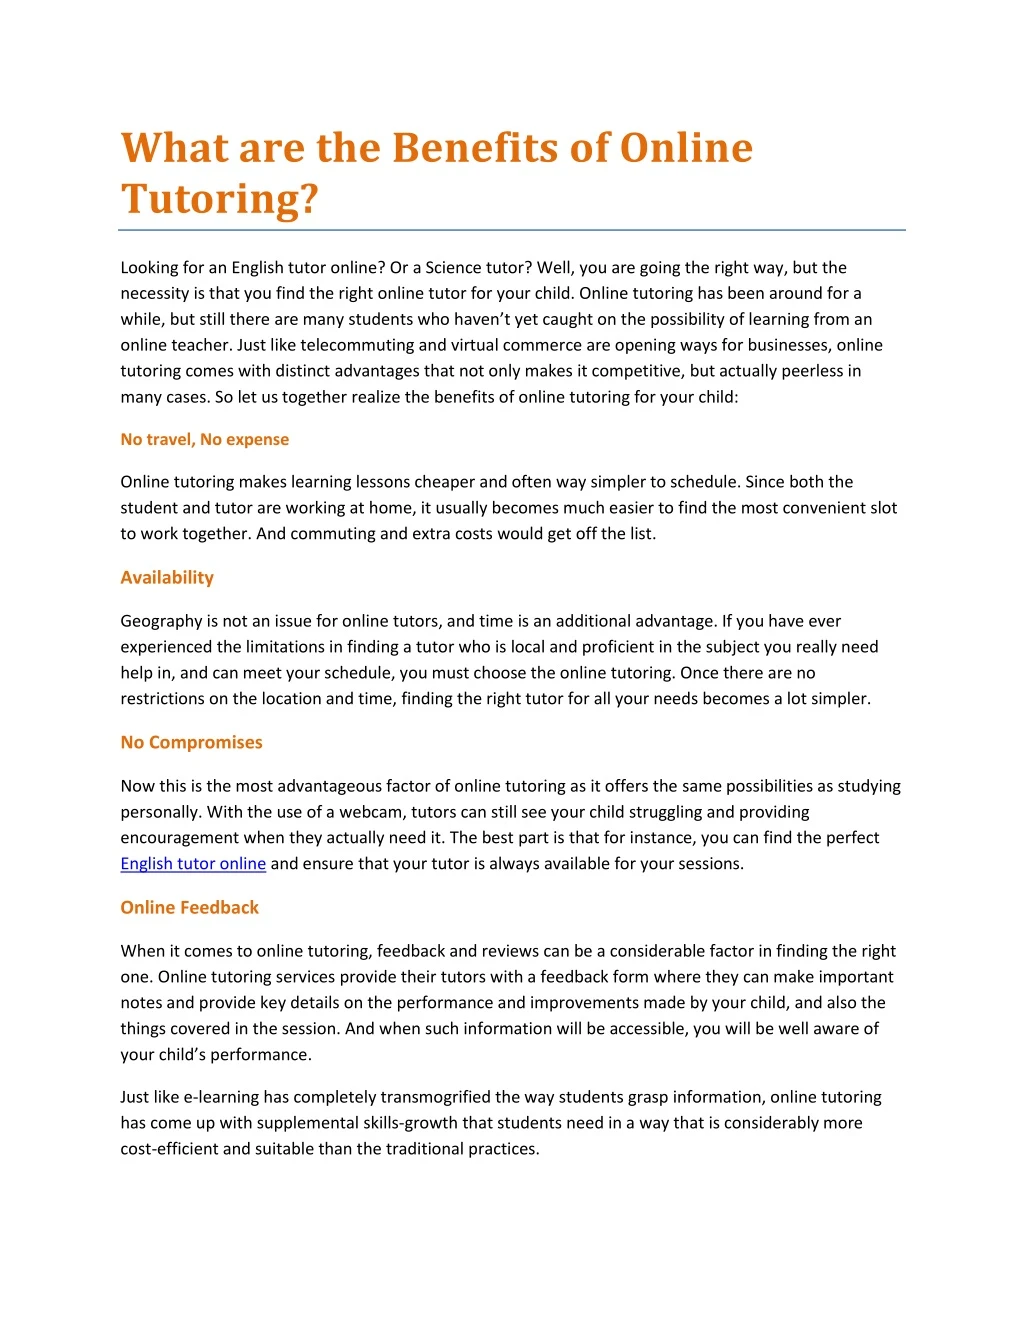 what are the benefits of online tutoring